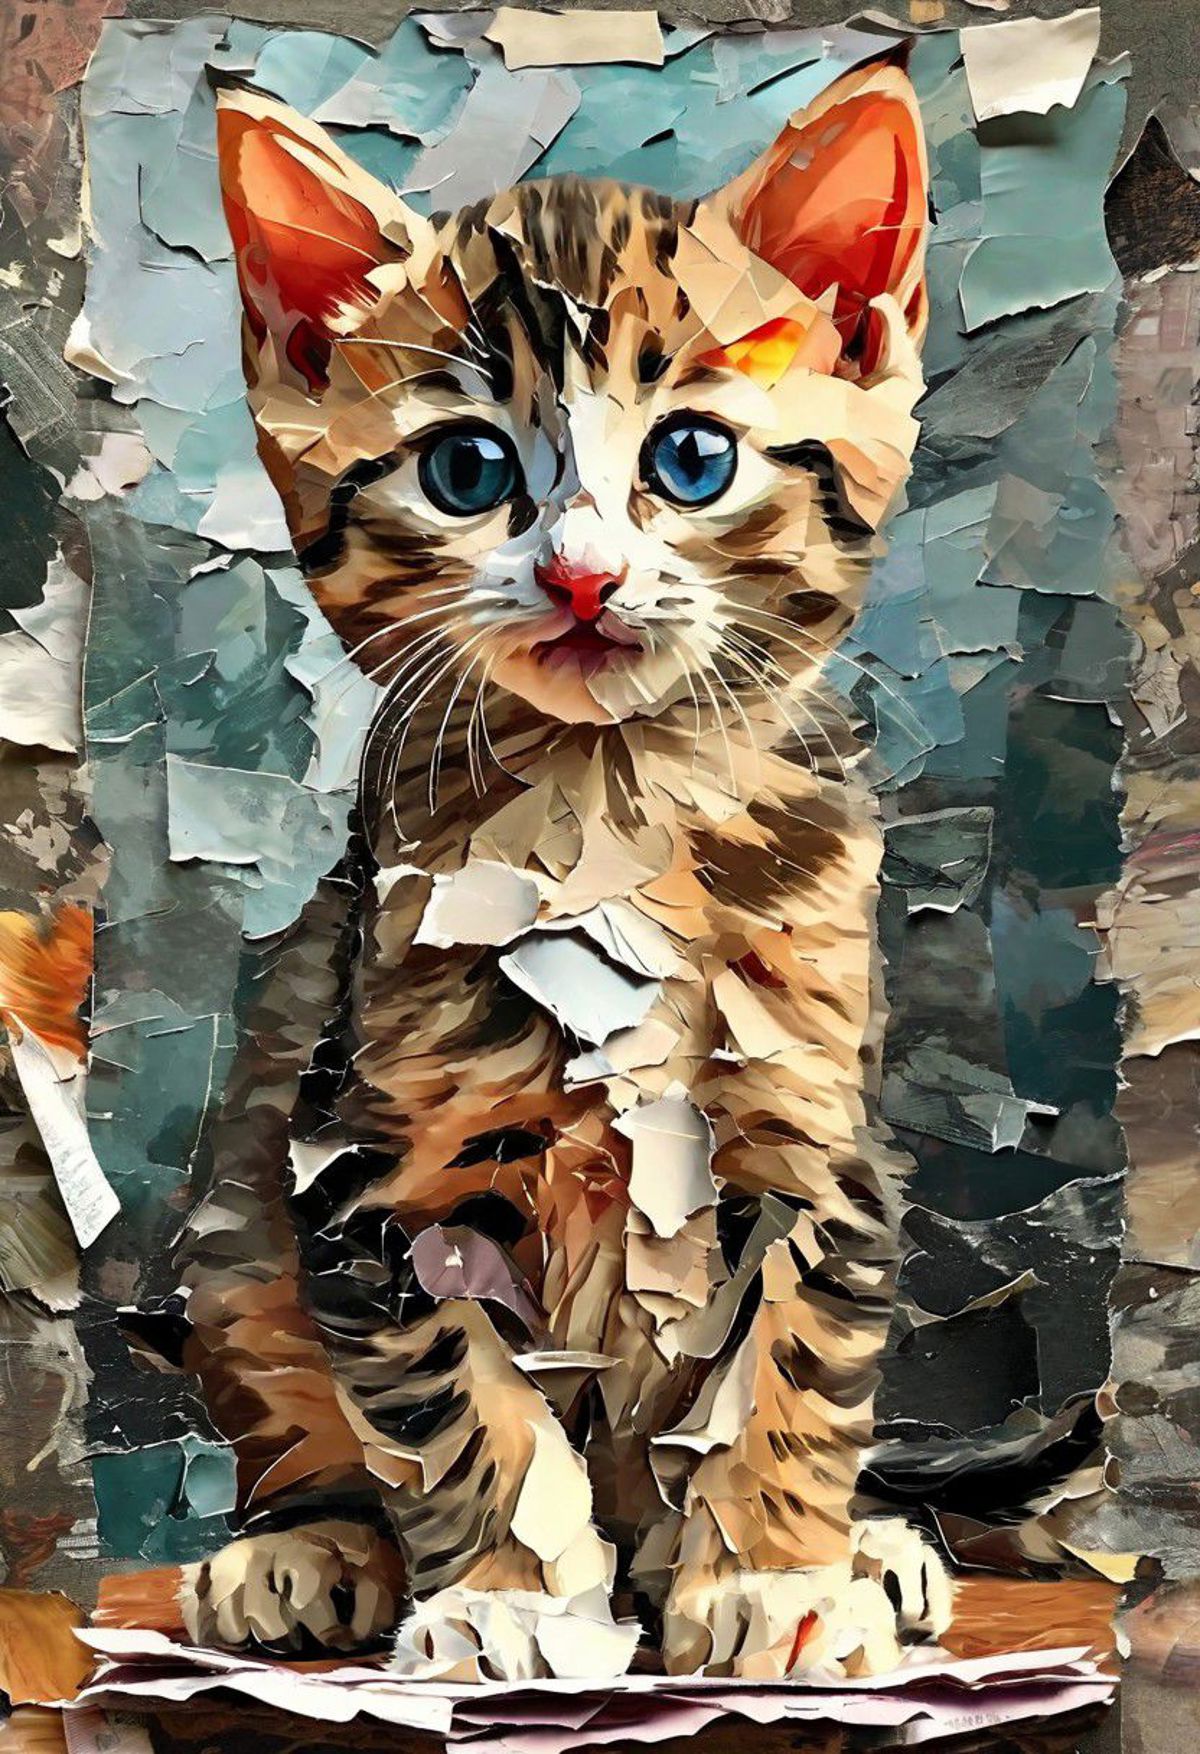 Torn Paper Collage Style - SDXL image by AIArtsChannel